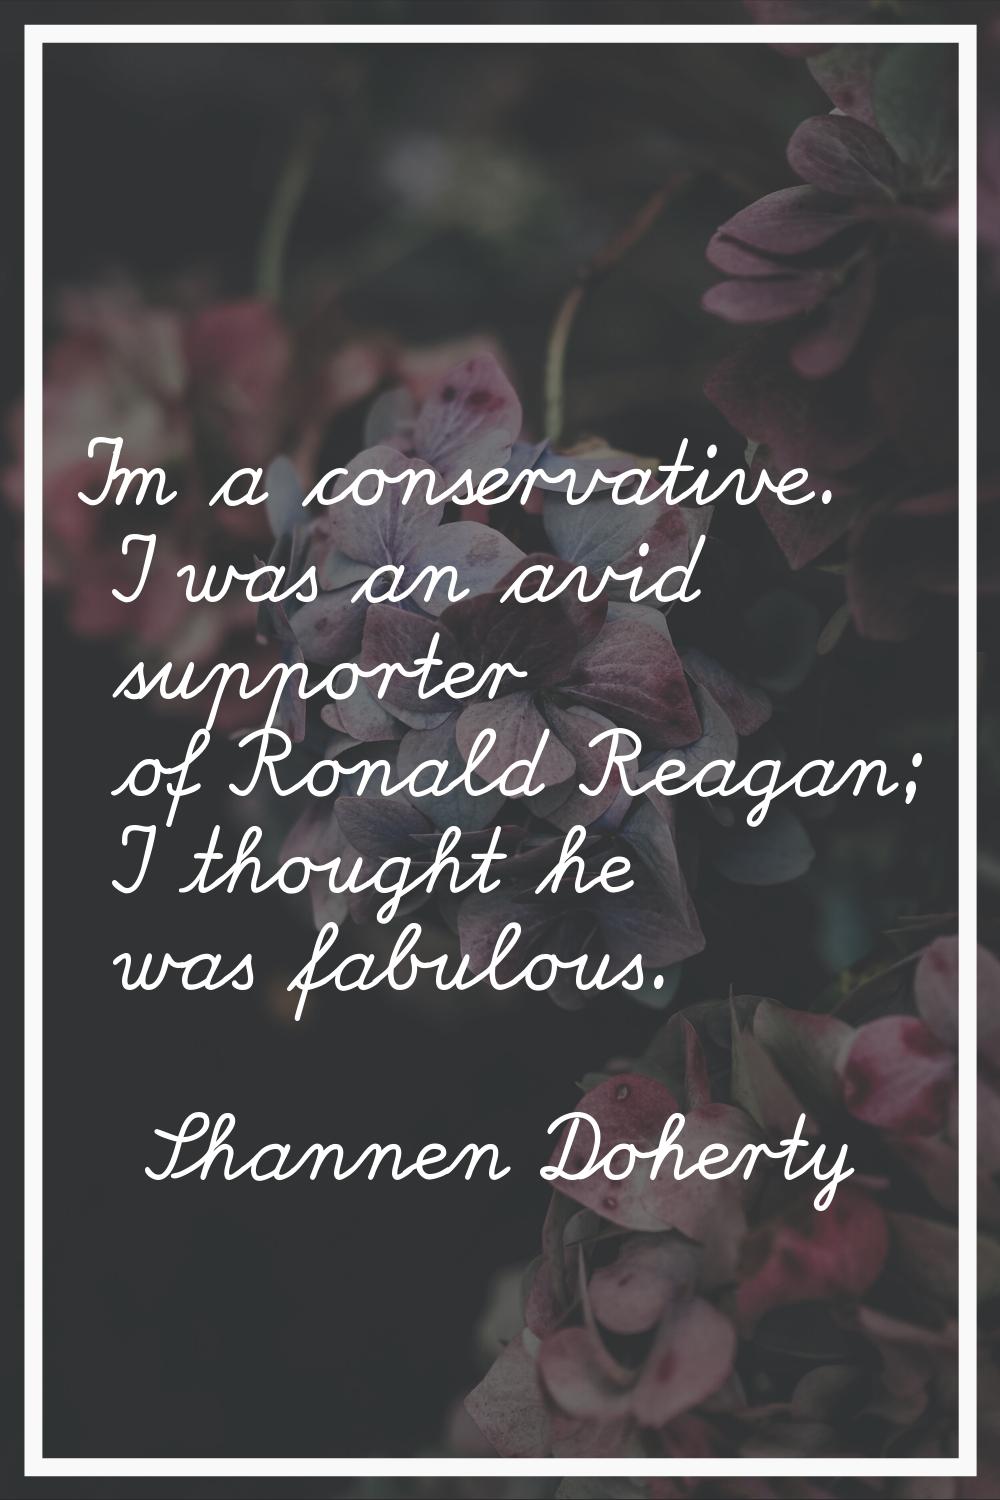 I'm a conservative. I was an avid supporter of Ronald Reagan; I thought he was fabulous.